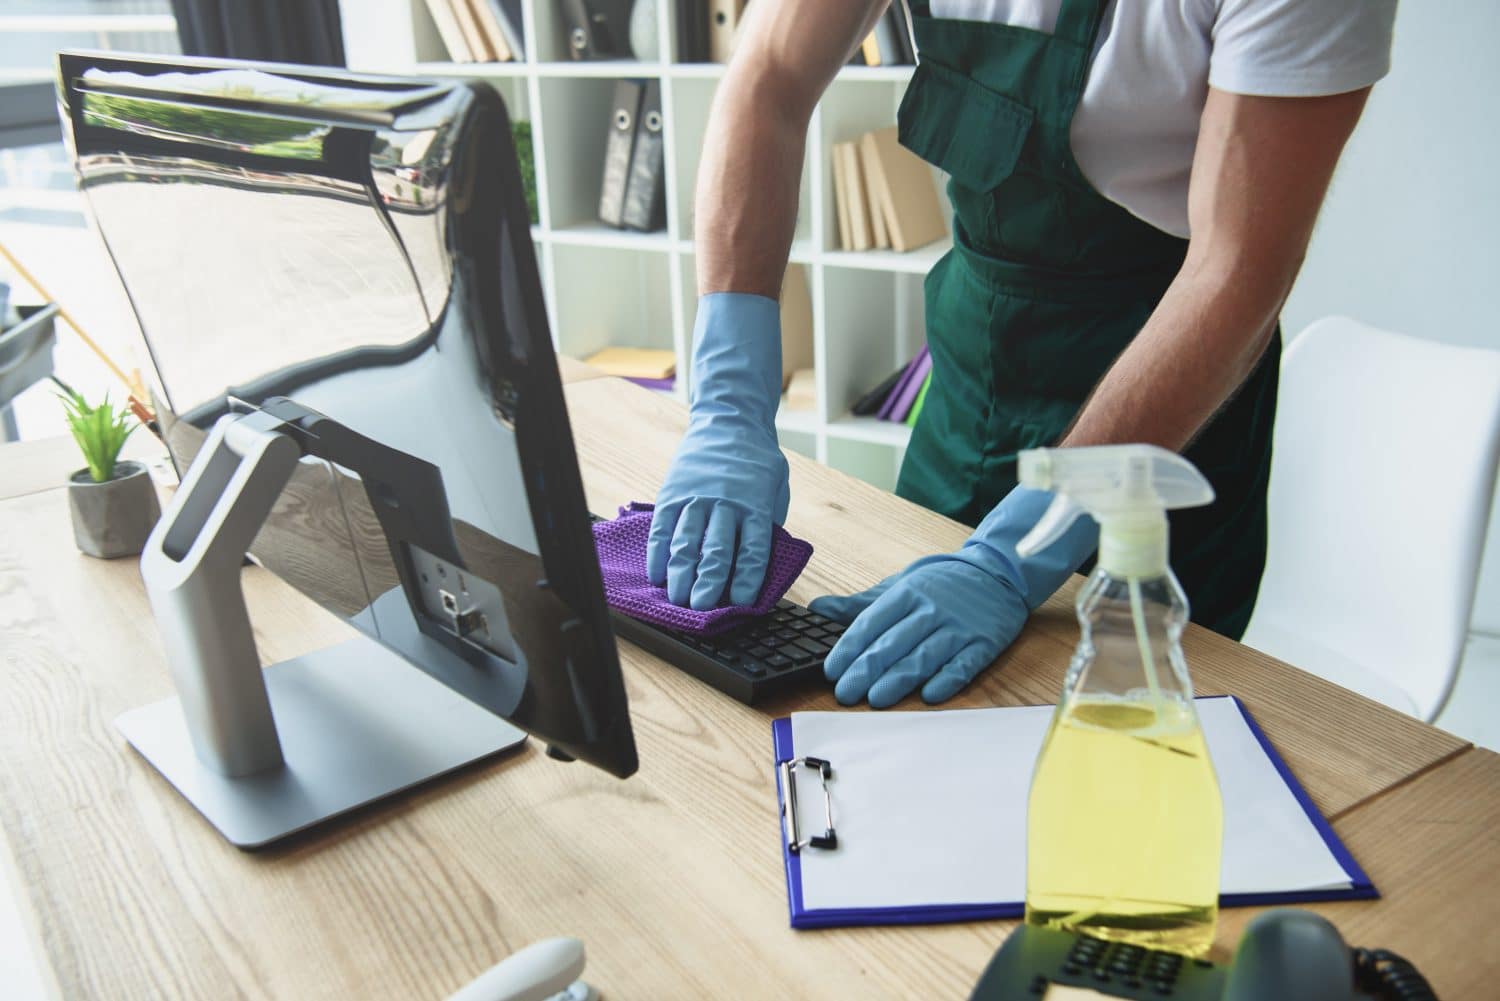 The Top Five Cleaning Pain Points for Facilities Managers